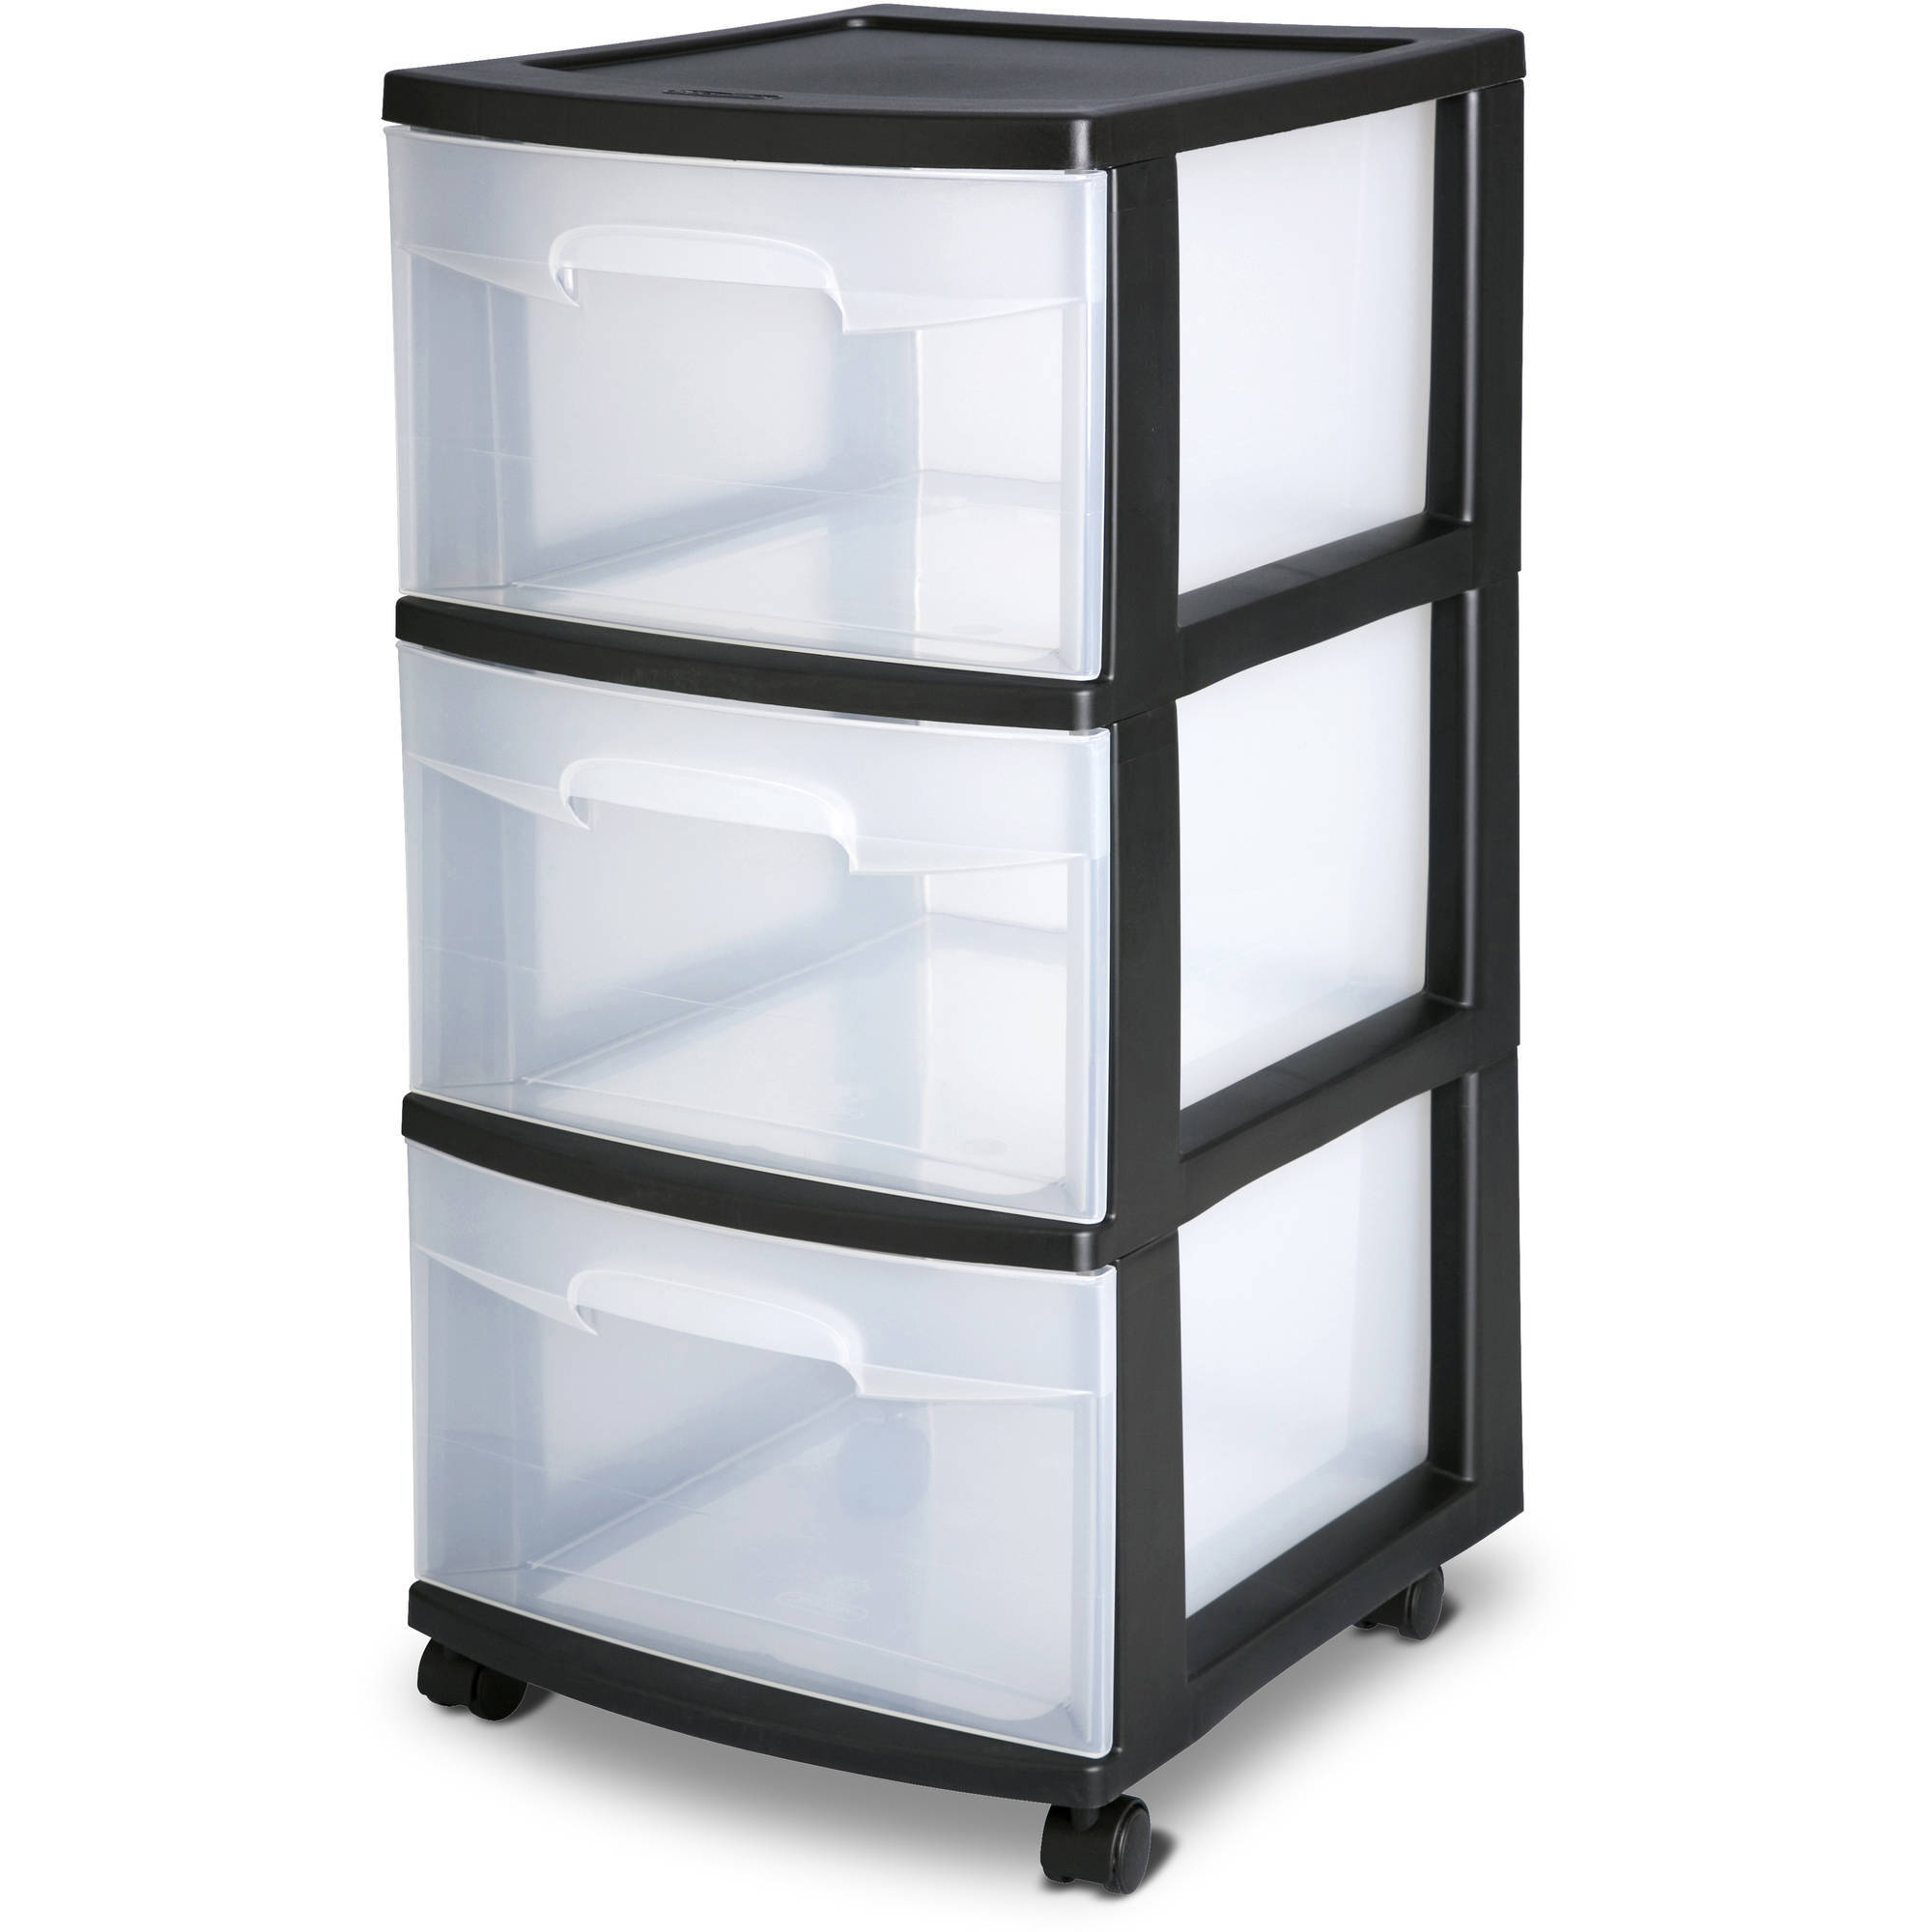 Sterilite 40 Vertical Wrap Container Infra Red Walmart intended for proportions 2000 X 2000